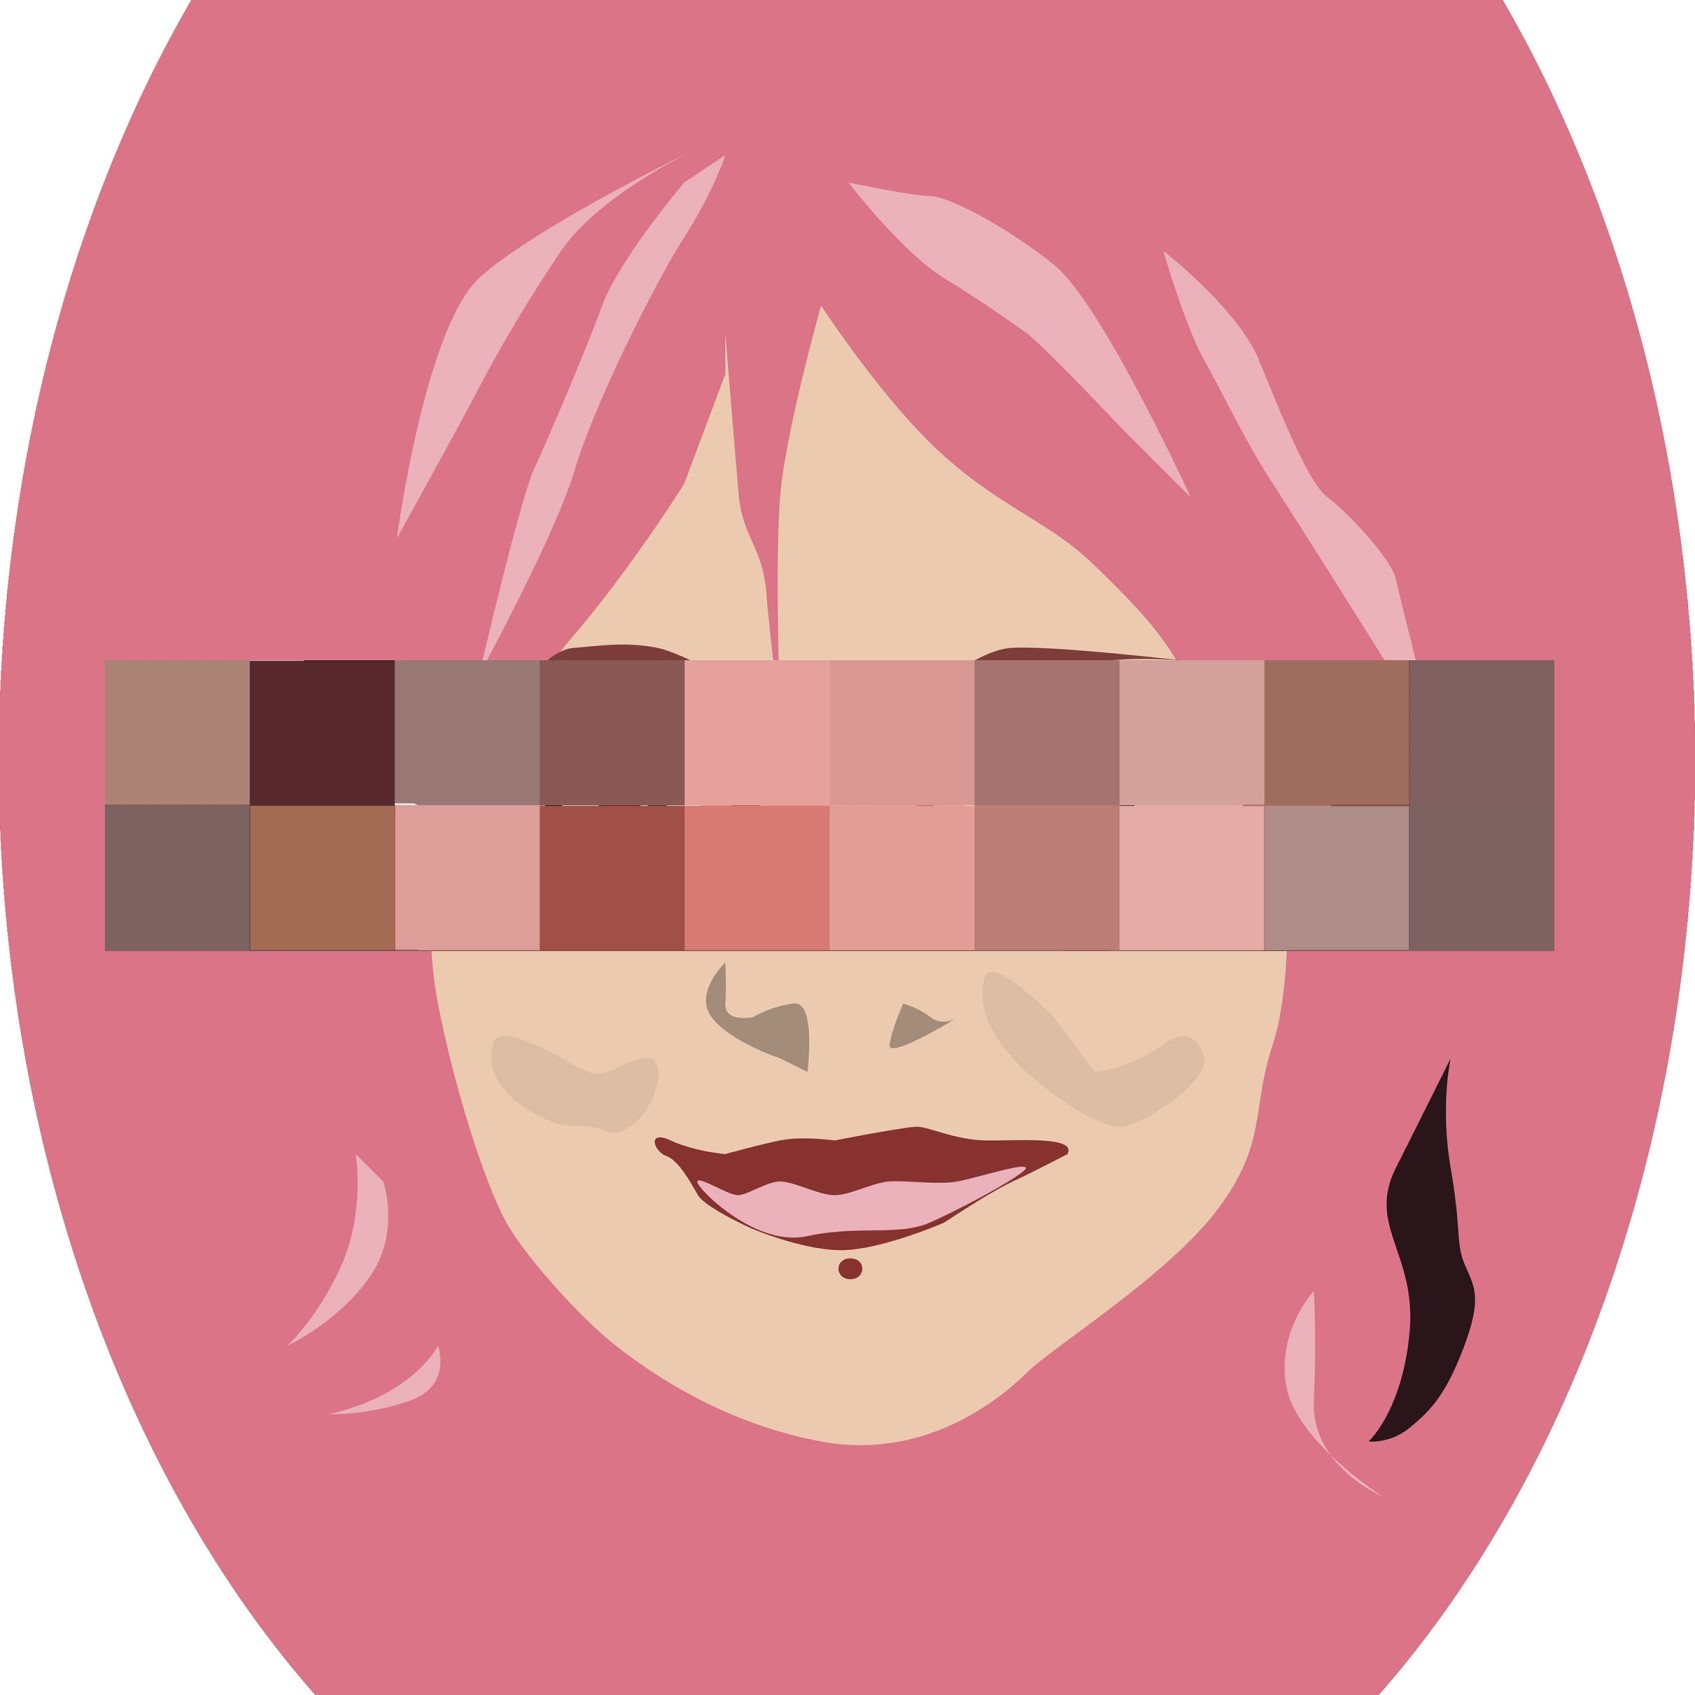 Digital portrait of woman with pink hair and blurred out eyes.